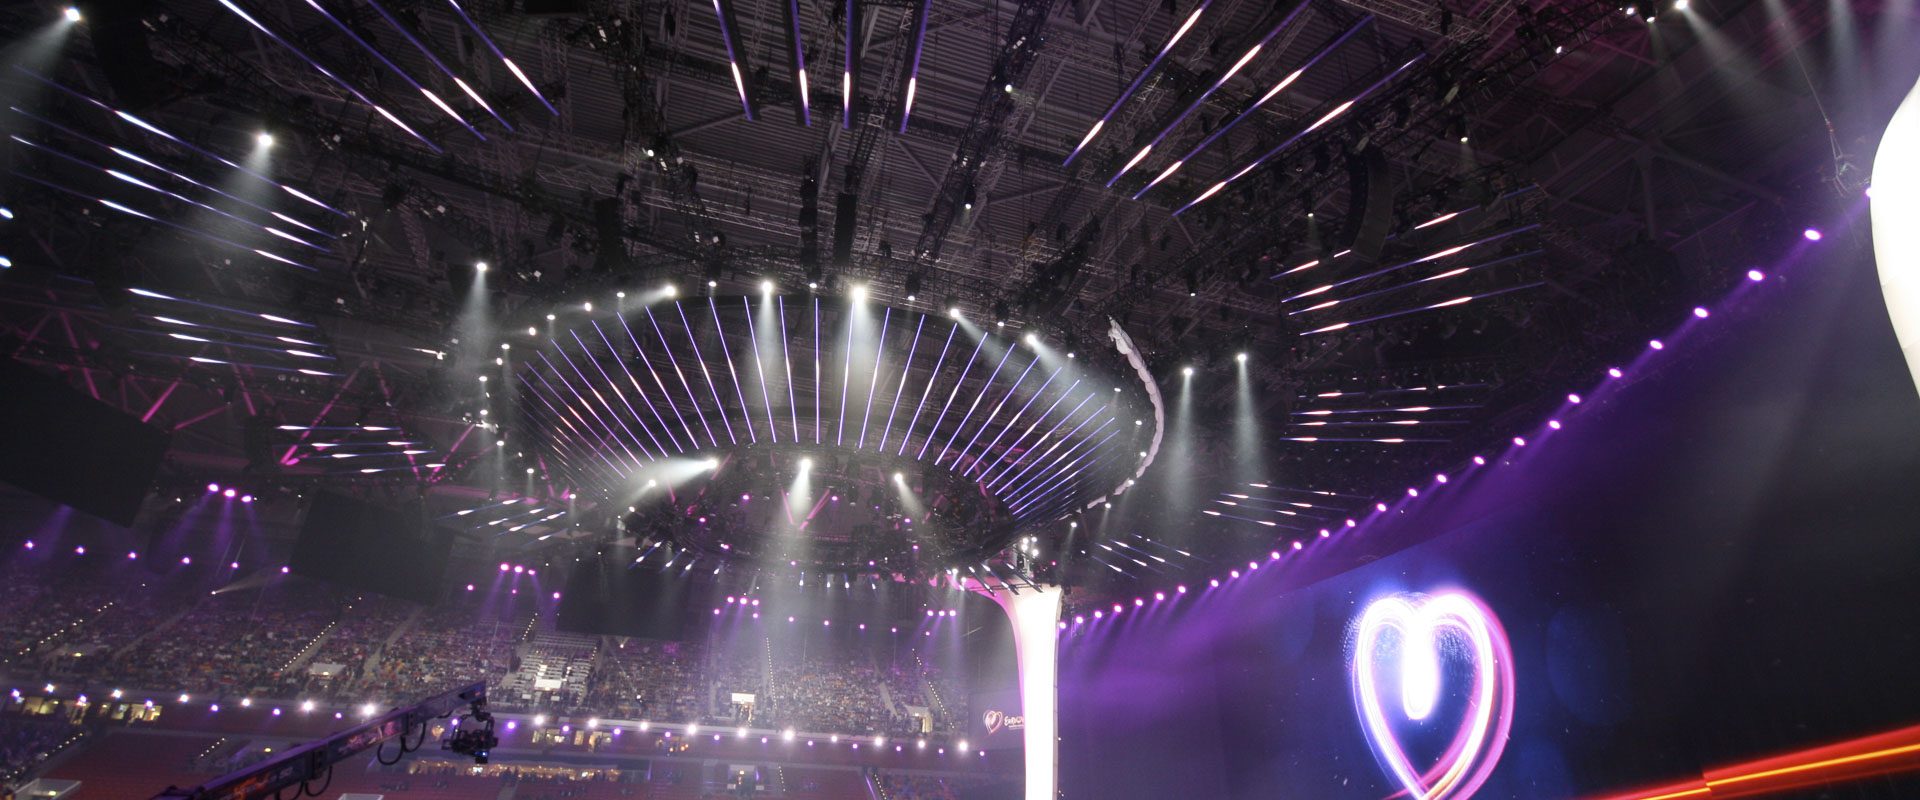 Eurovision Song Contest 2011 2